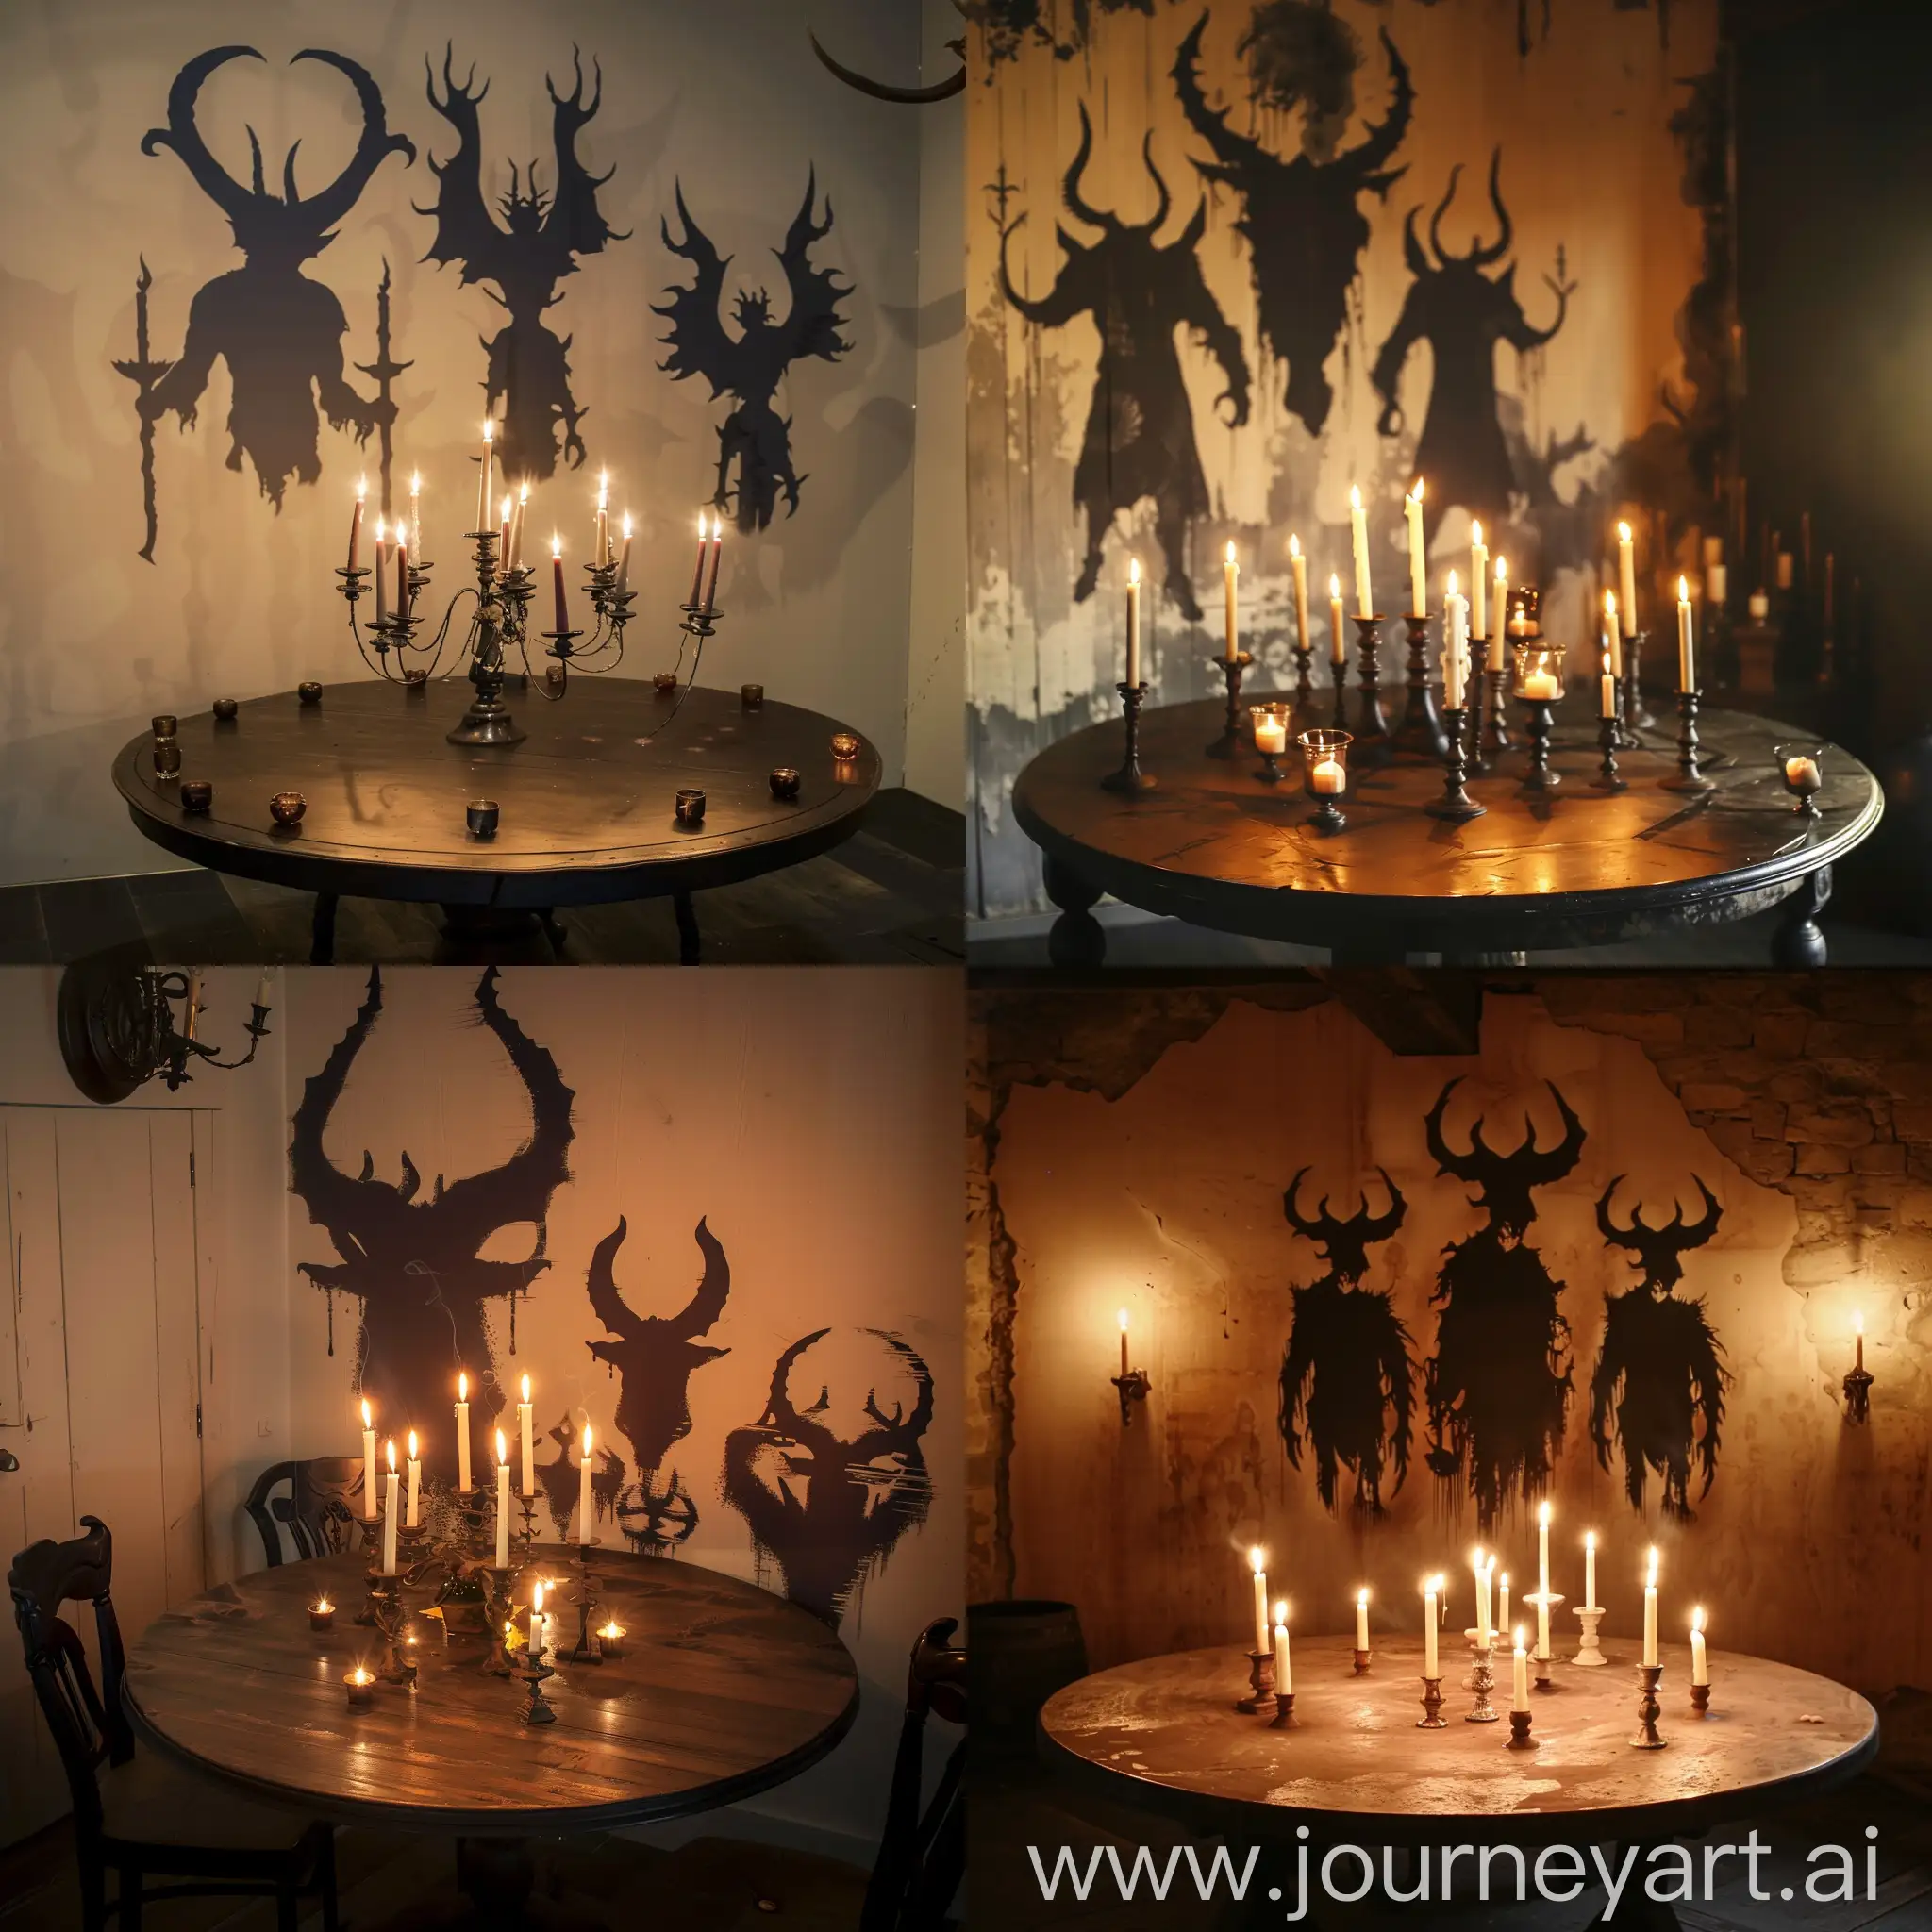 Enchanting-Round-Table-with-Horned-Silhouettes-and-Illuminating-Candles